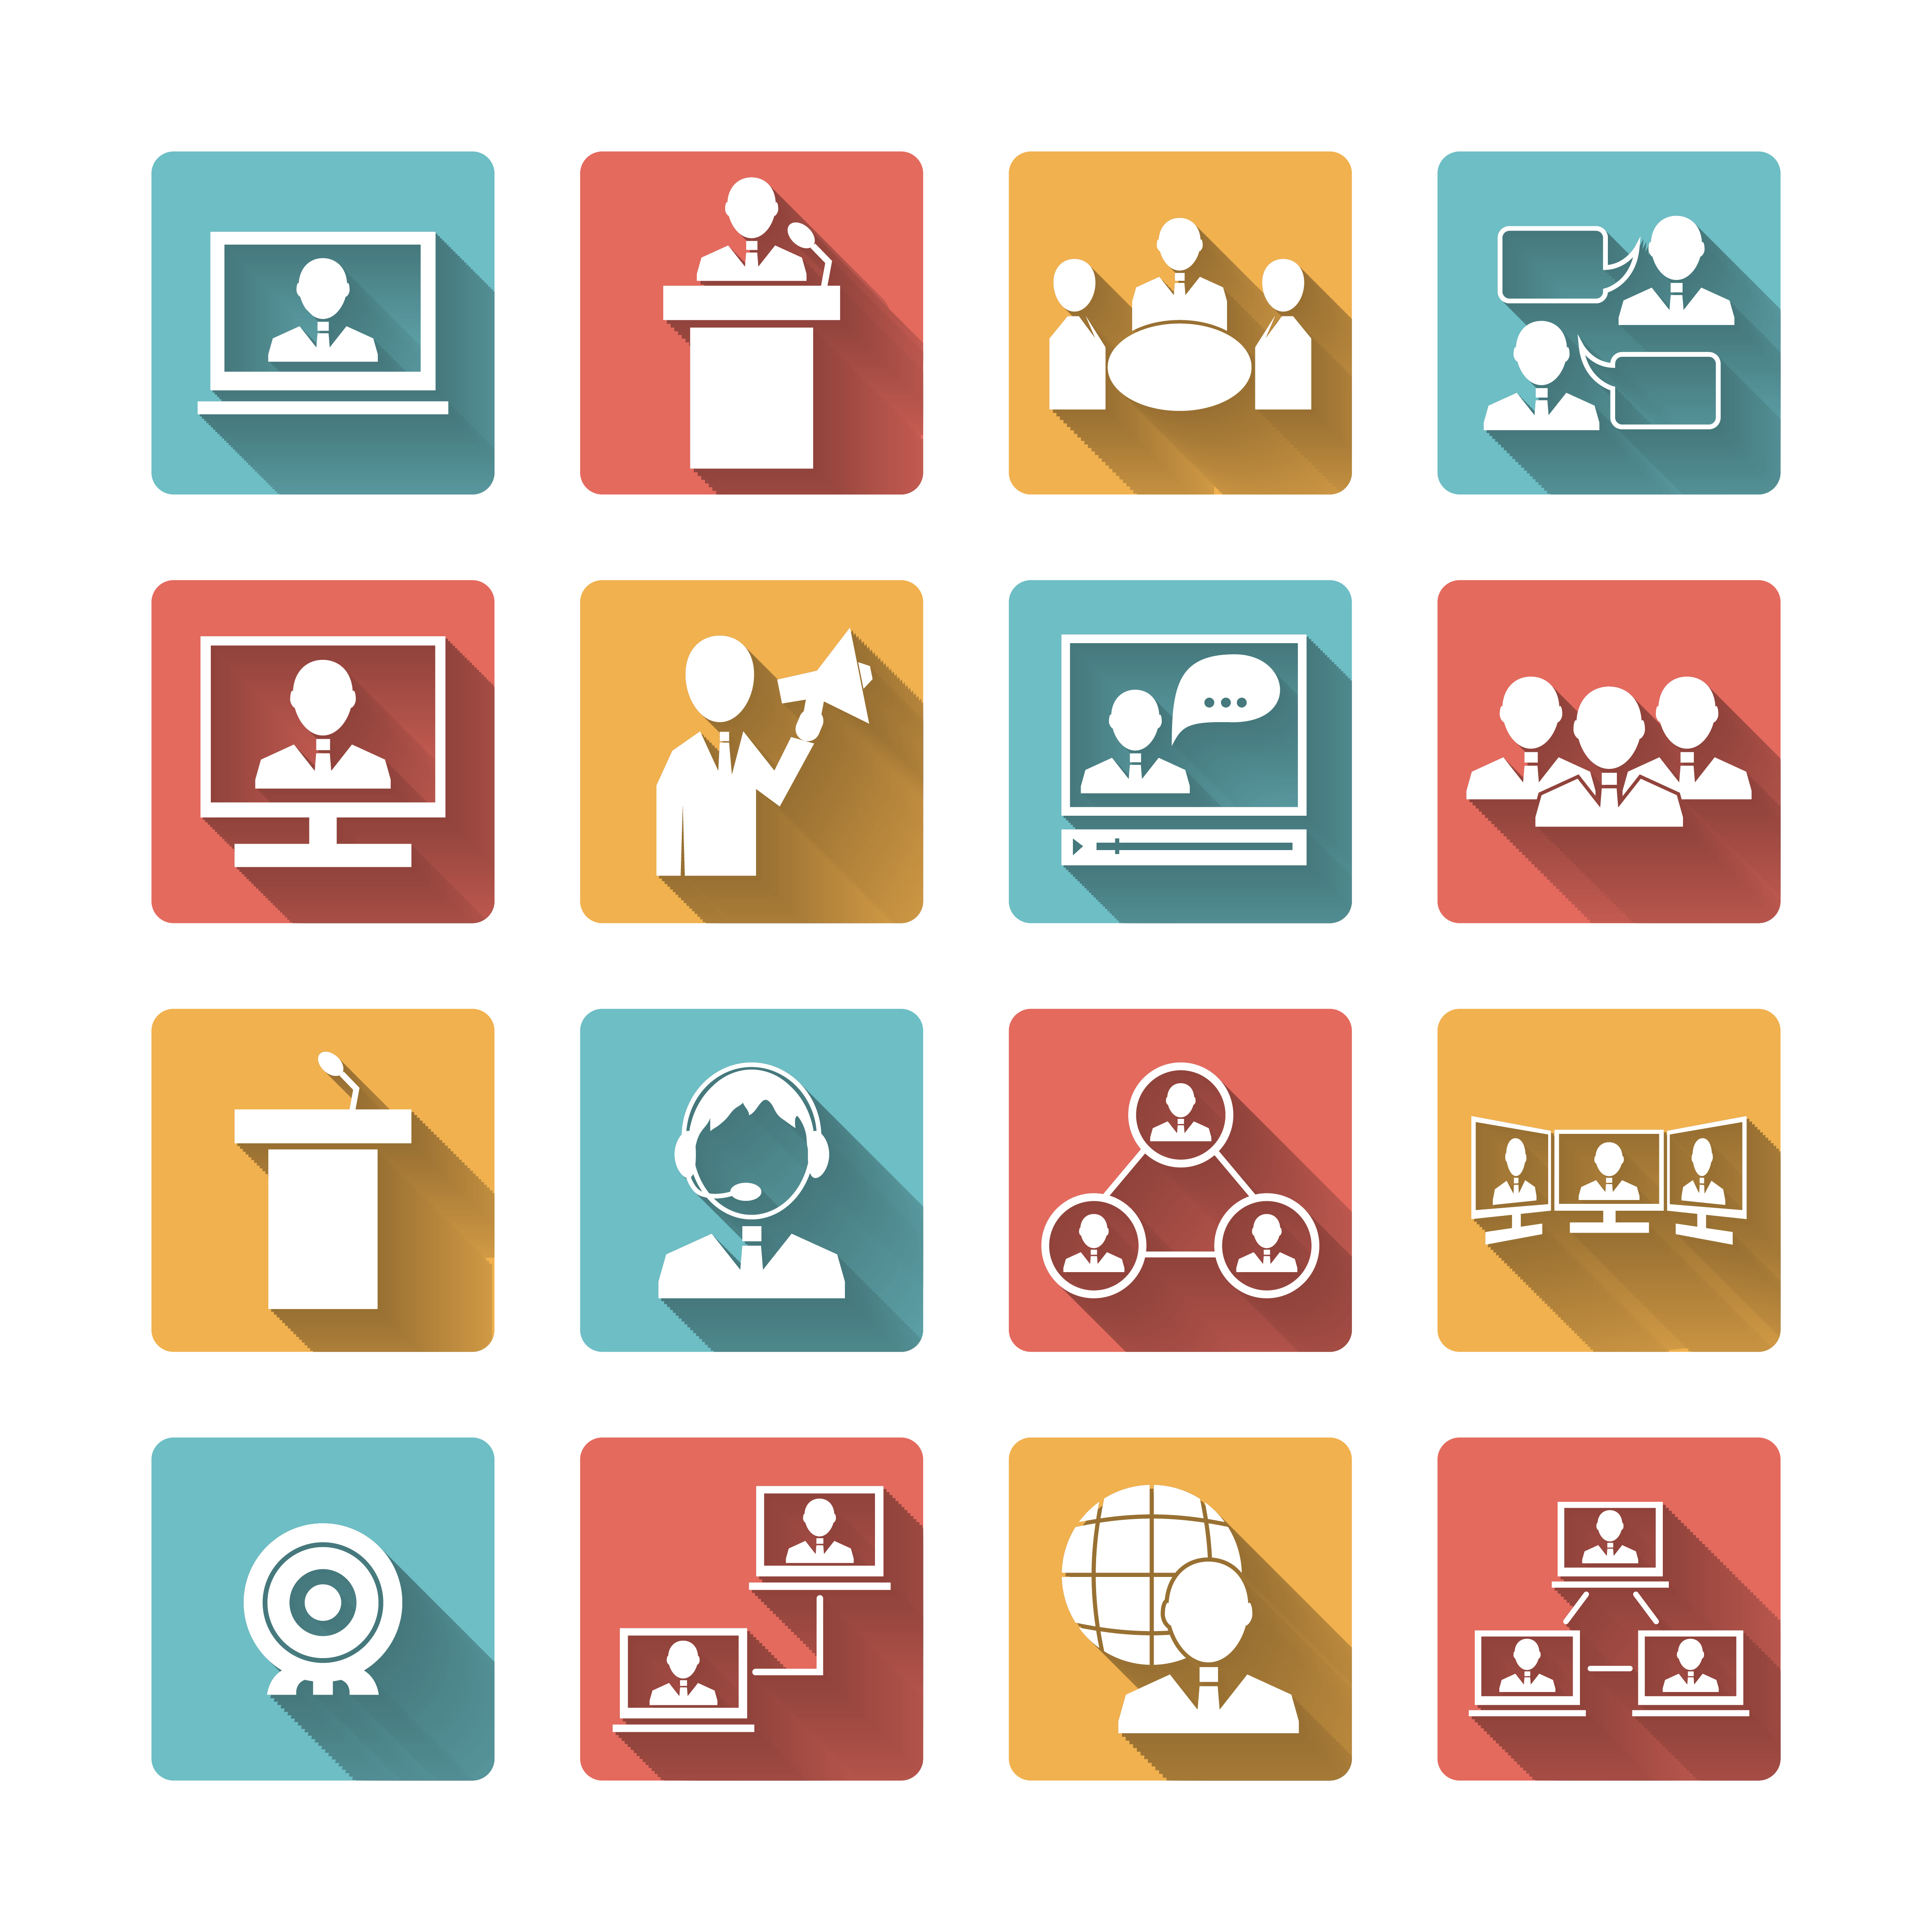  Business  People Meeting Icons  Set 463522 Download Free  